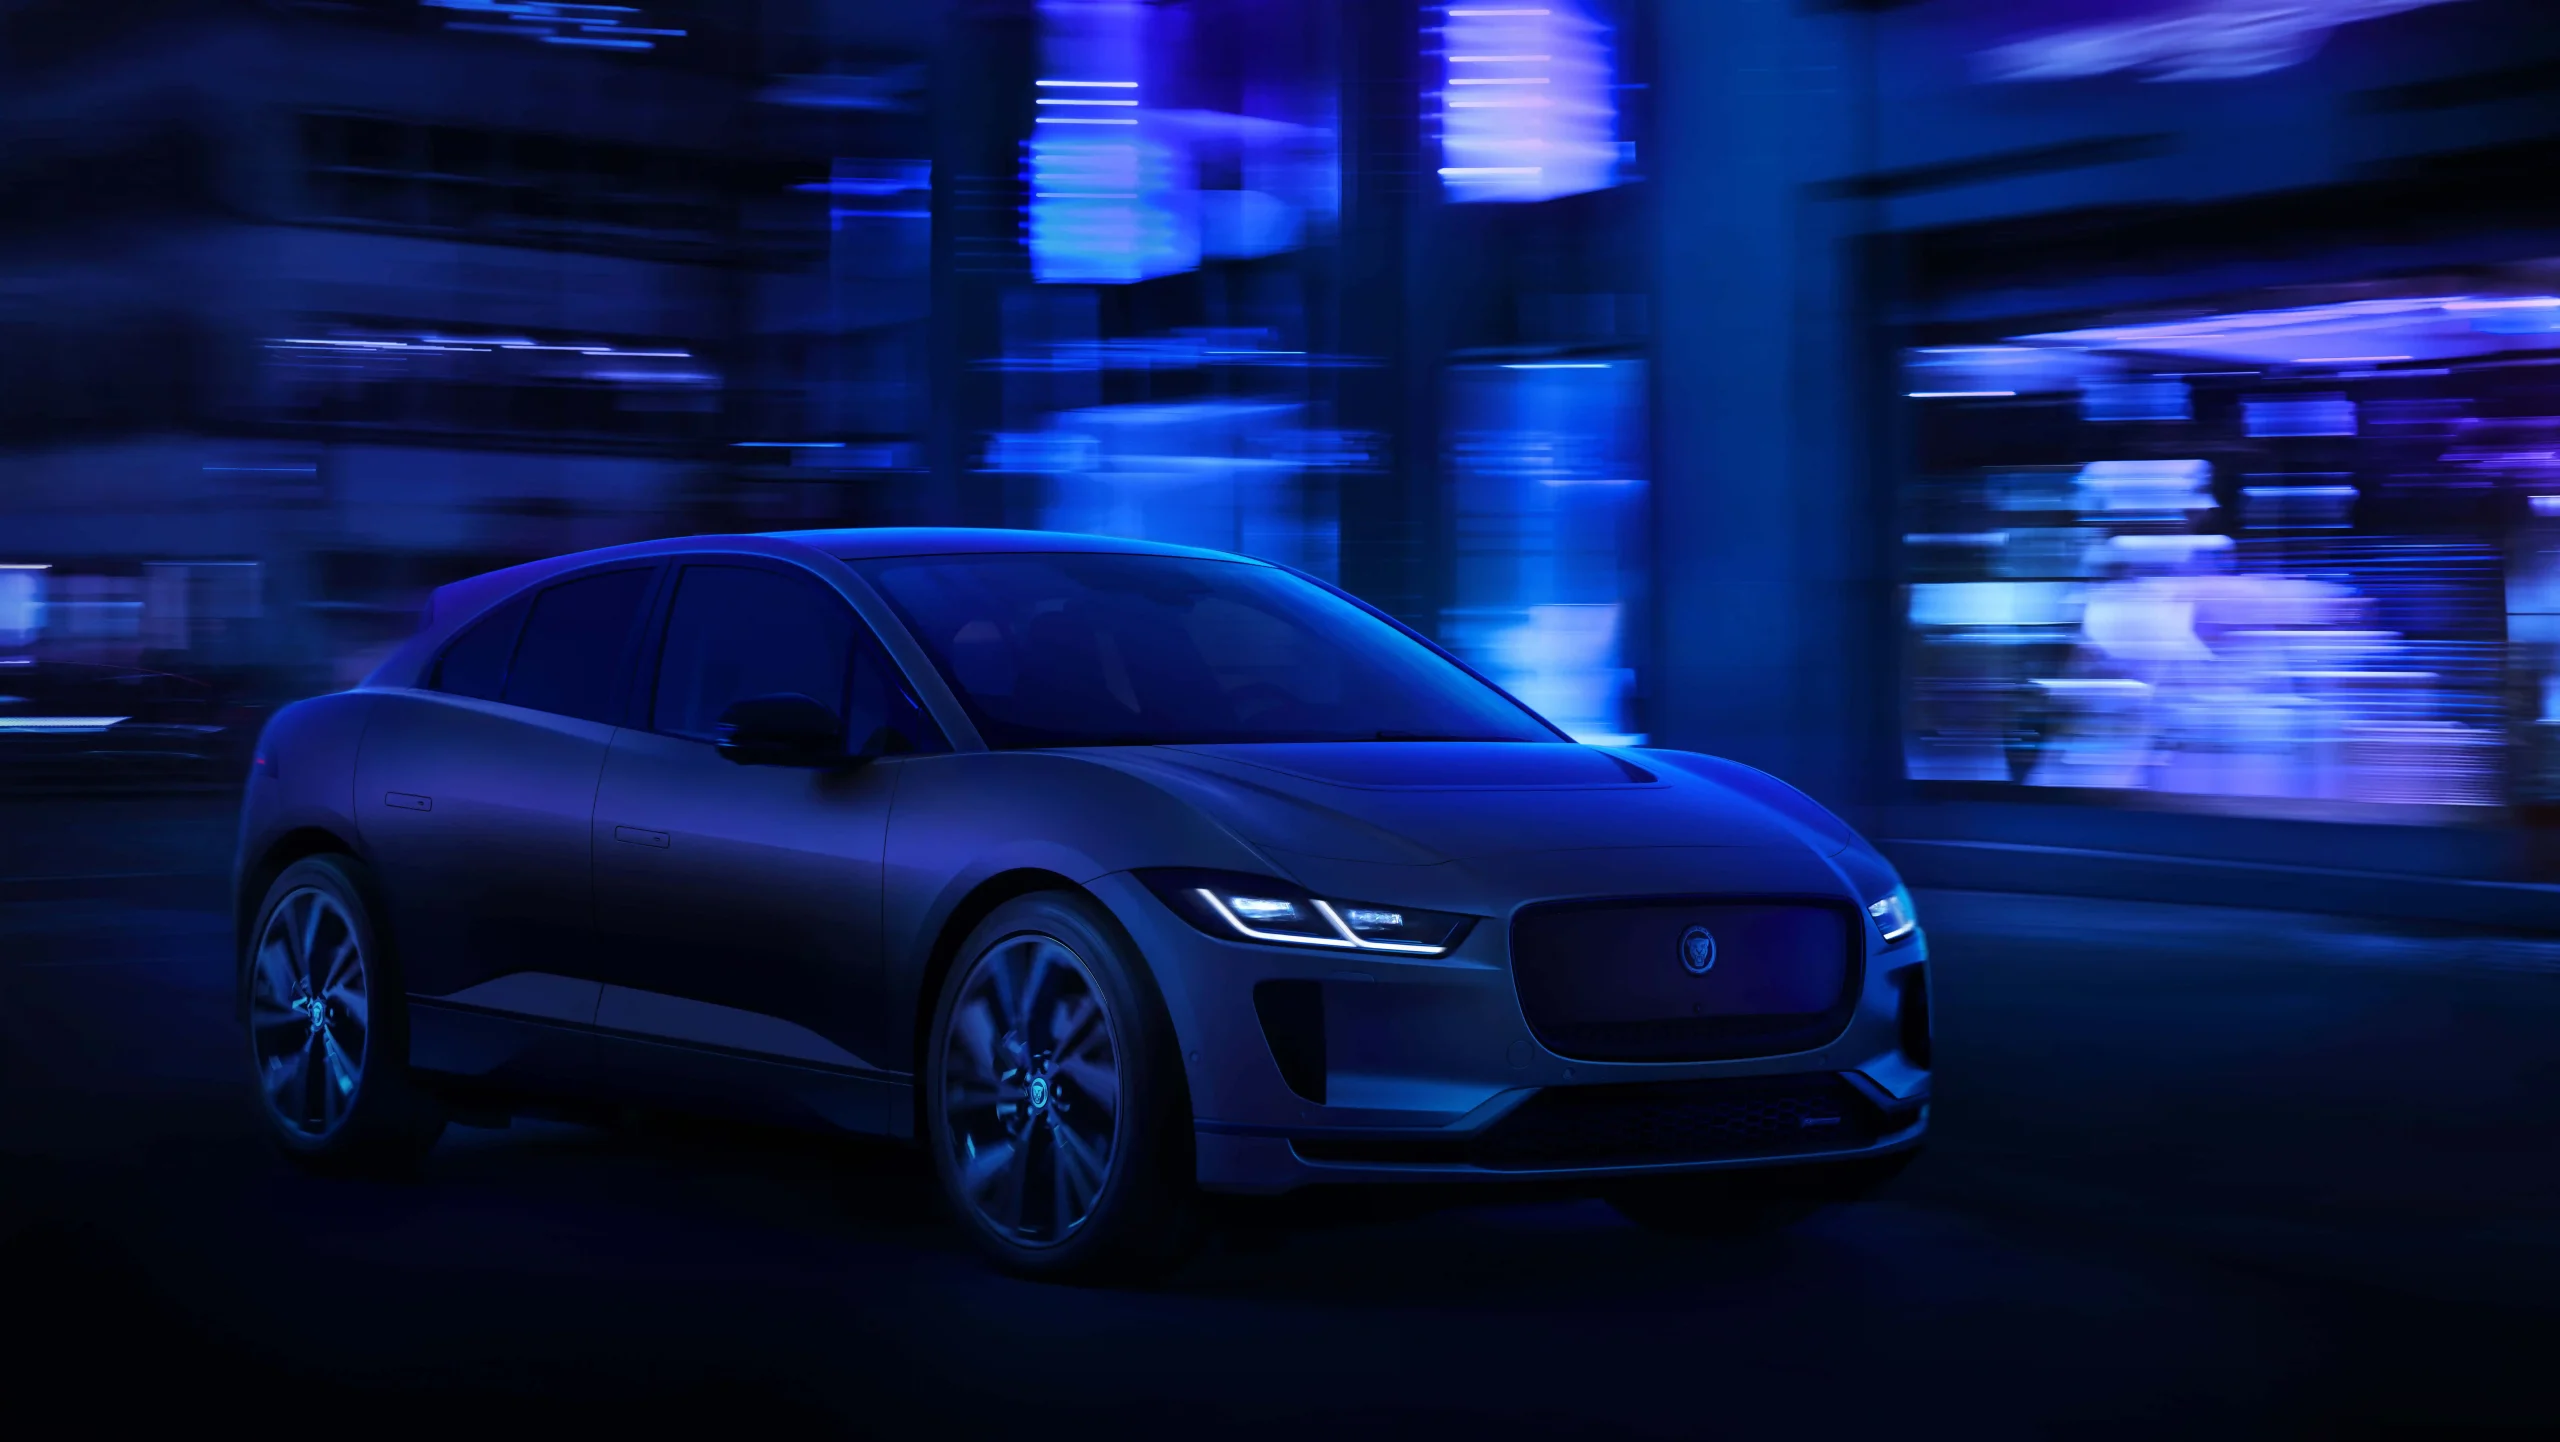 THE AWARD-WINNING JAGUAR I-PACE IS NOW MORE DISTINCTIVE AND MORE DESIRABLE © Copyright PLPG GLOBAL MEDIA 2023